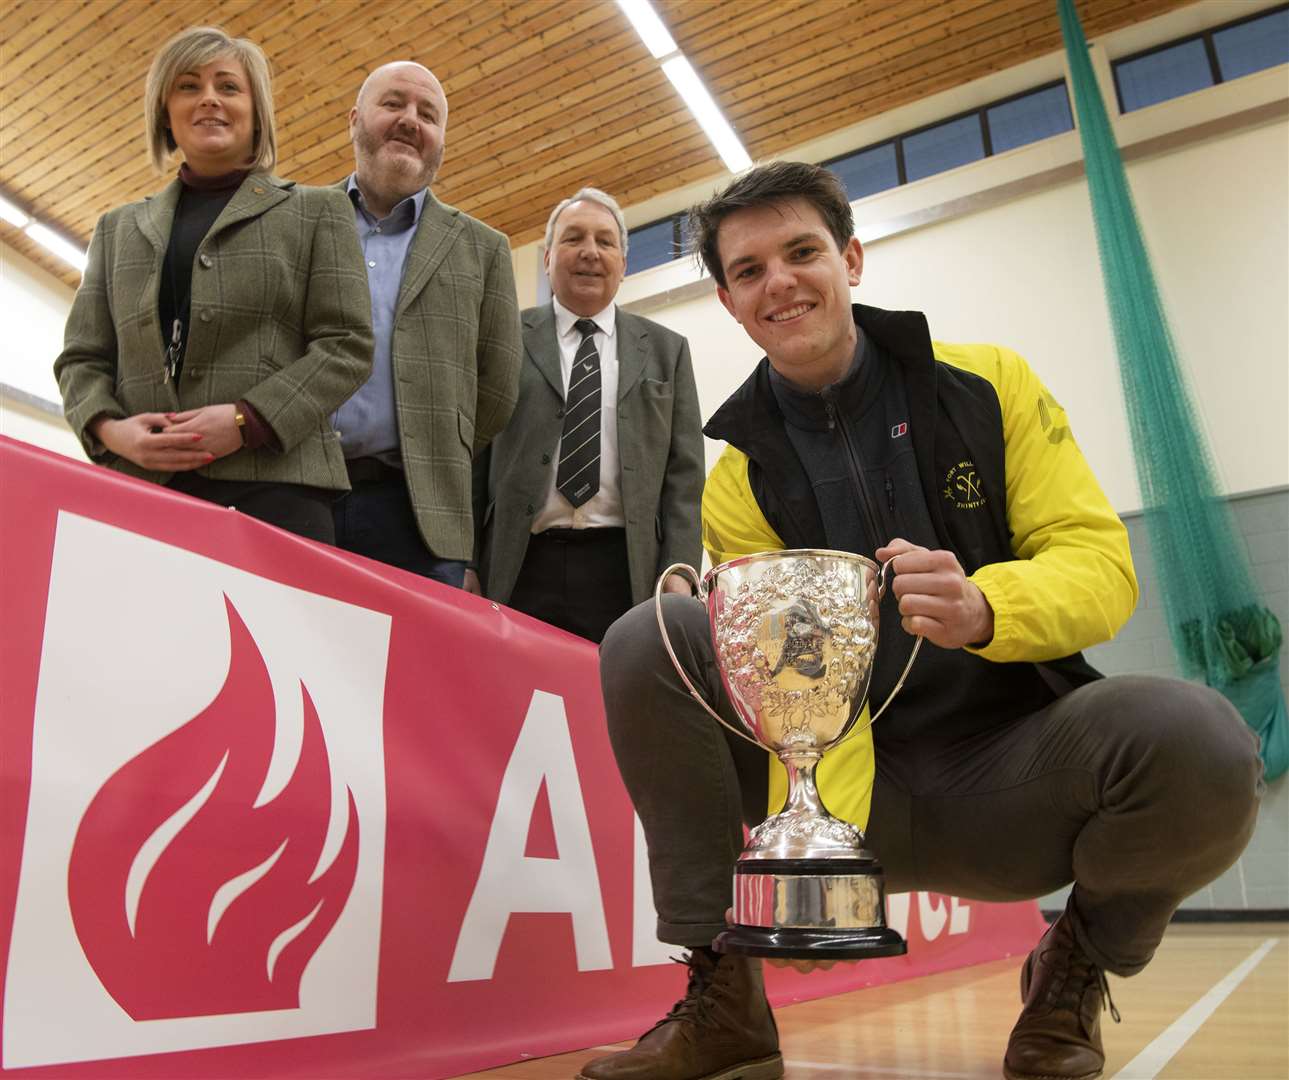 Representatives of Alvance British Aluminium, Rosie Flannigan and Tom Uppington with Camanachd Association President Keith Loades alongside Fort William Shinty Player and Alvance Engineer Arran McPhee holding the Cup. Picture Iain Ferguson. The Write Image